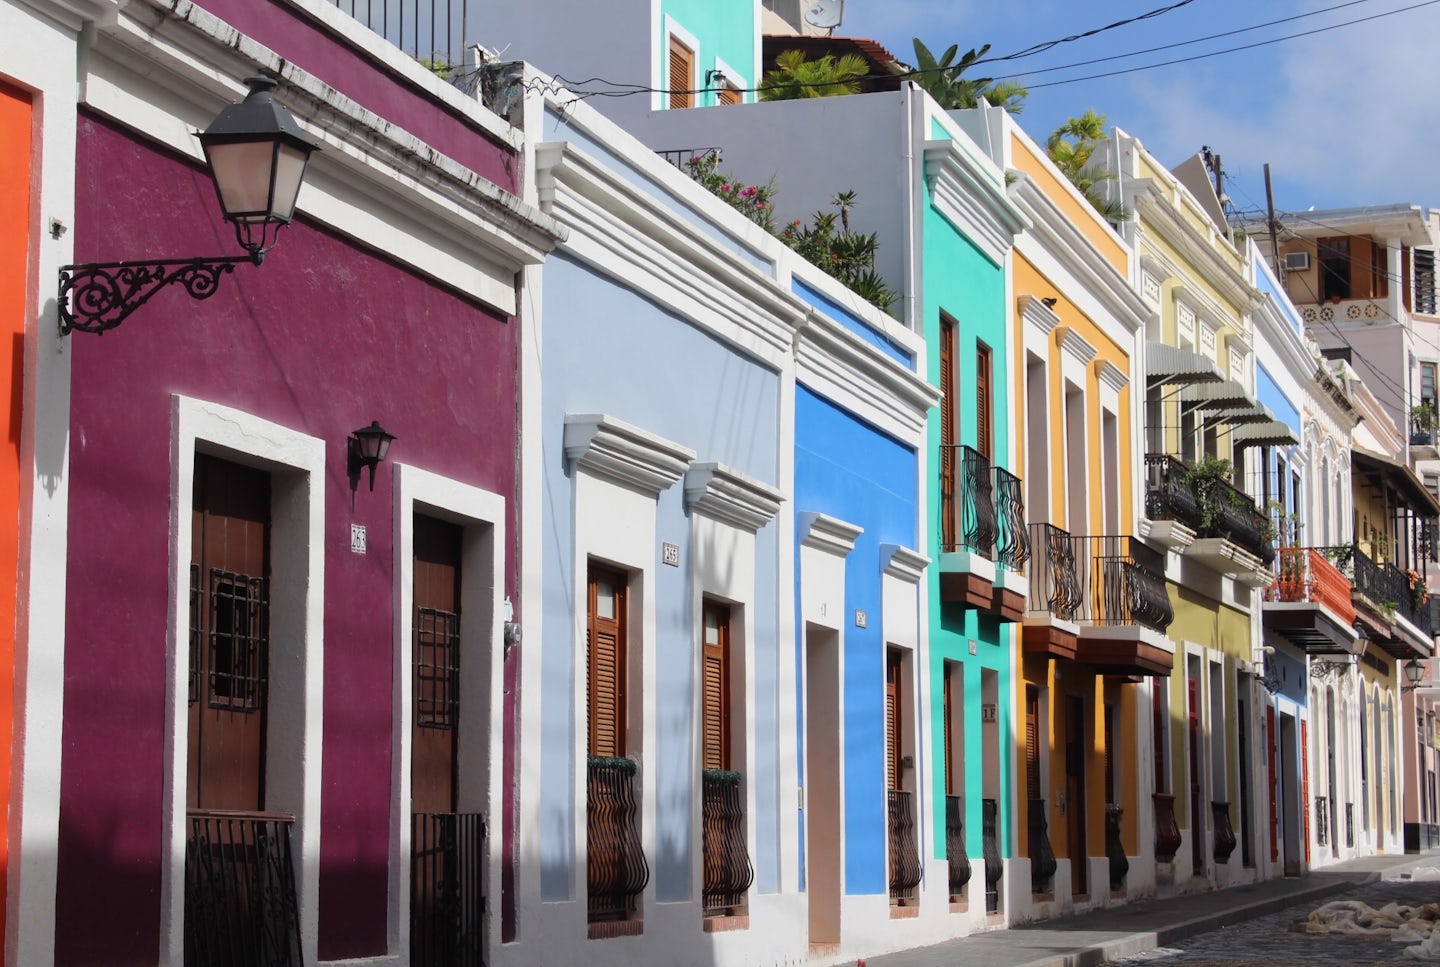 These are just a couple of the beautiful homes in the streets of Old San Juan.